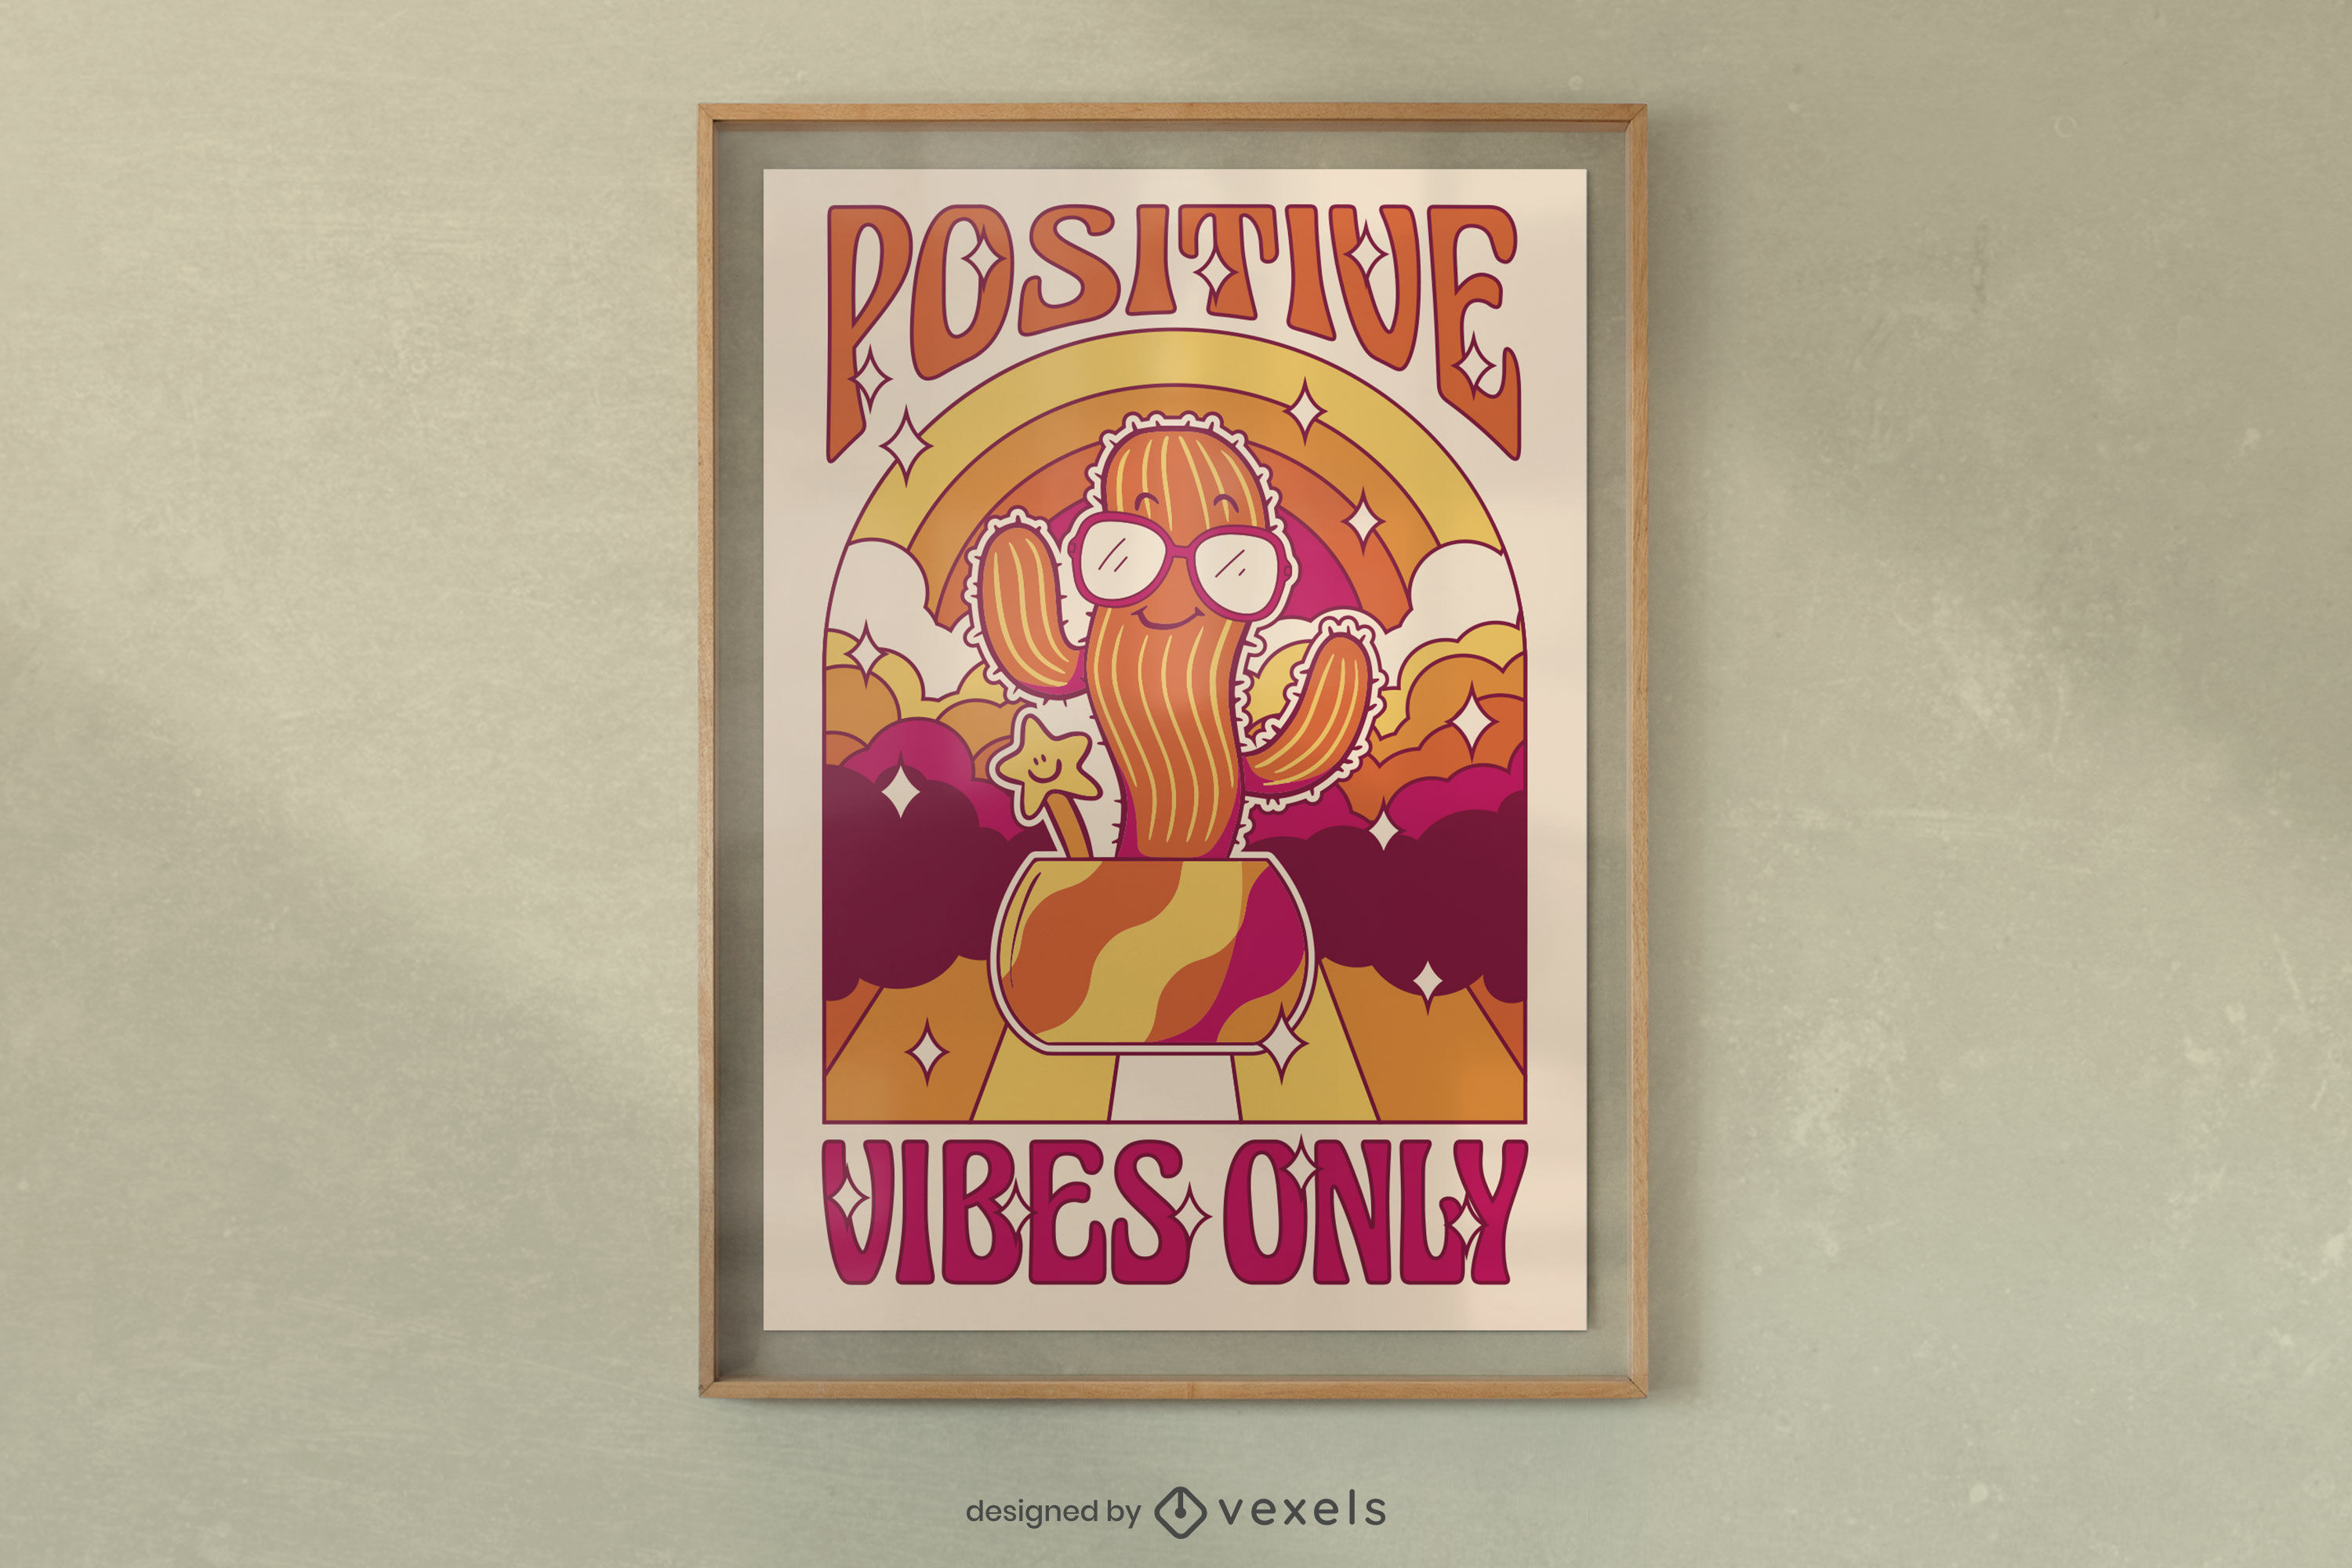 Positive vibes cactus poster design